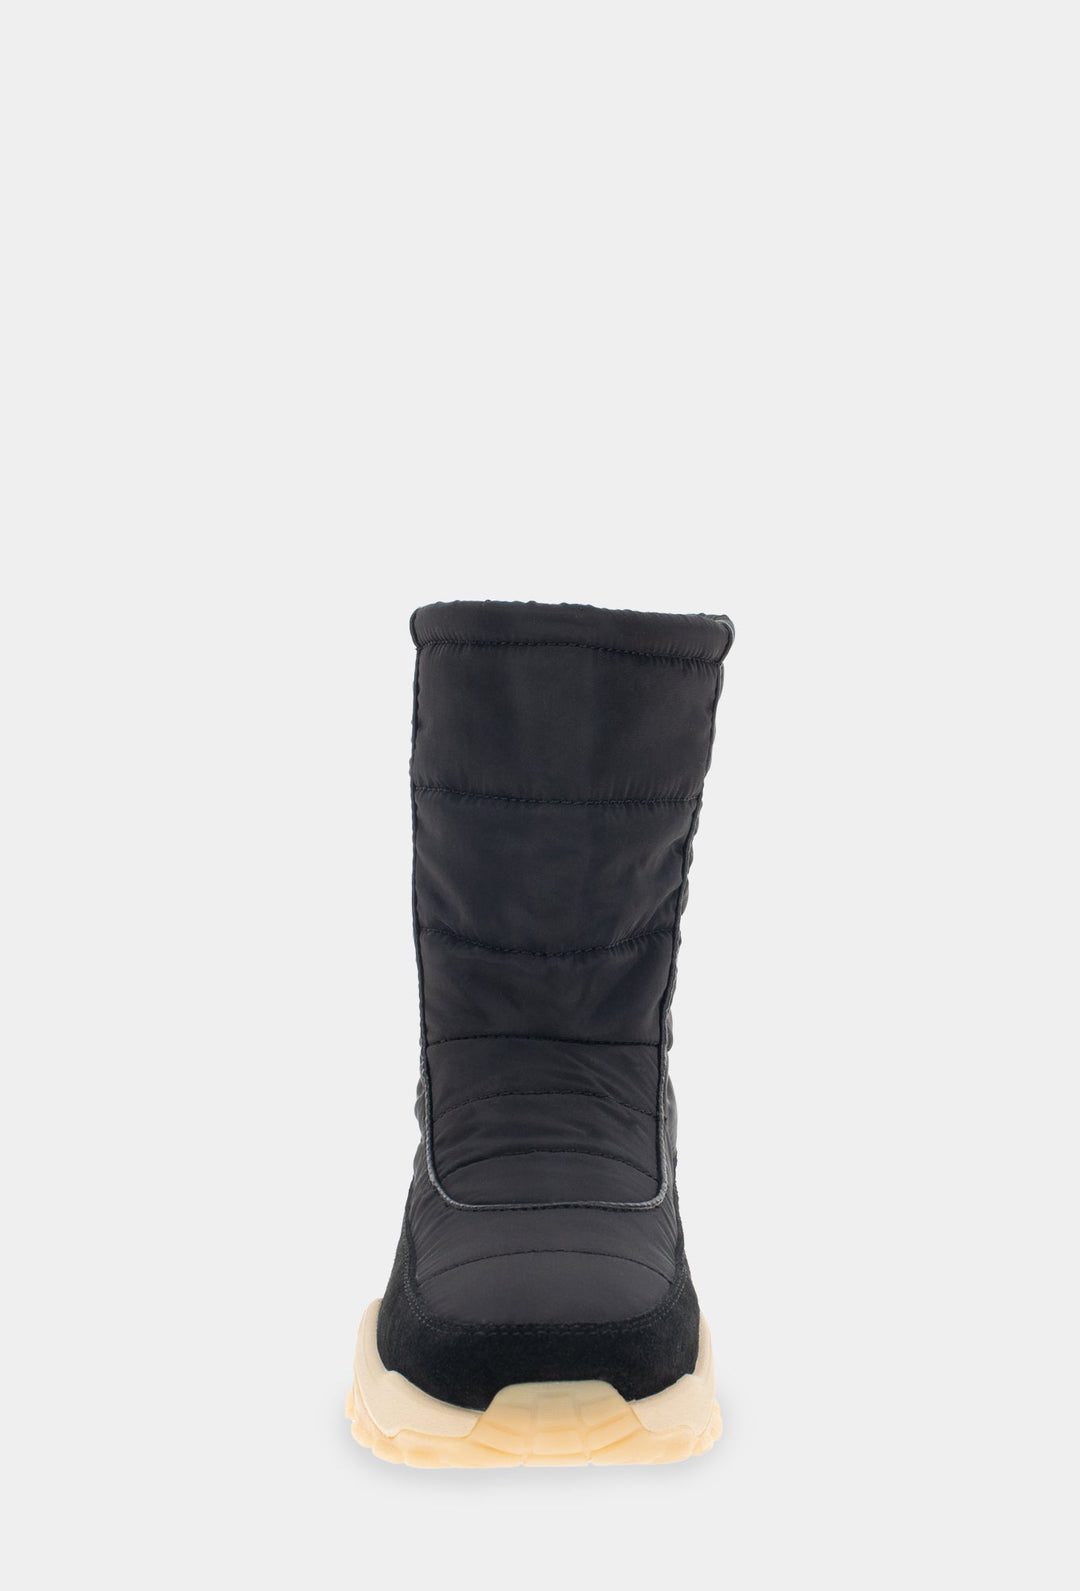 Lenox Puffer Cold Weather Boot - Black - Western Chief